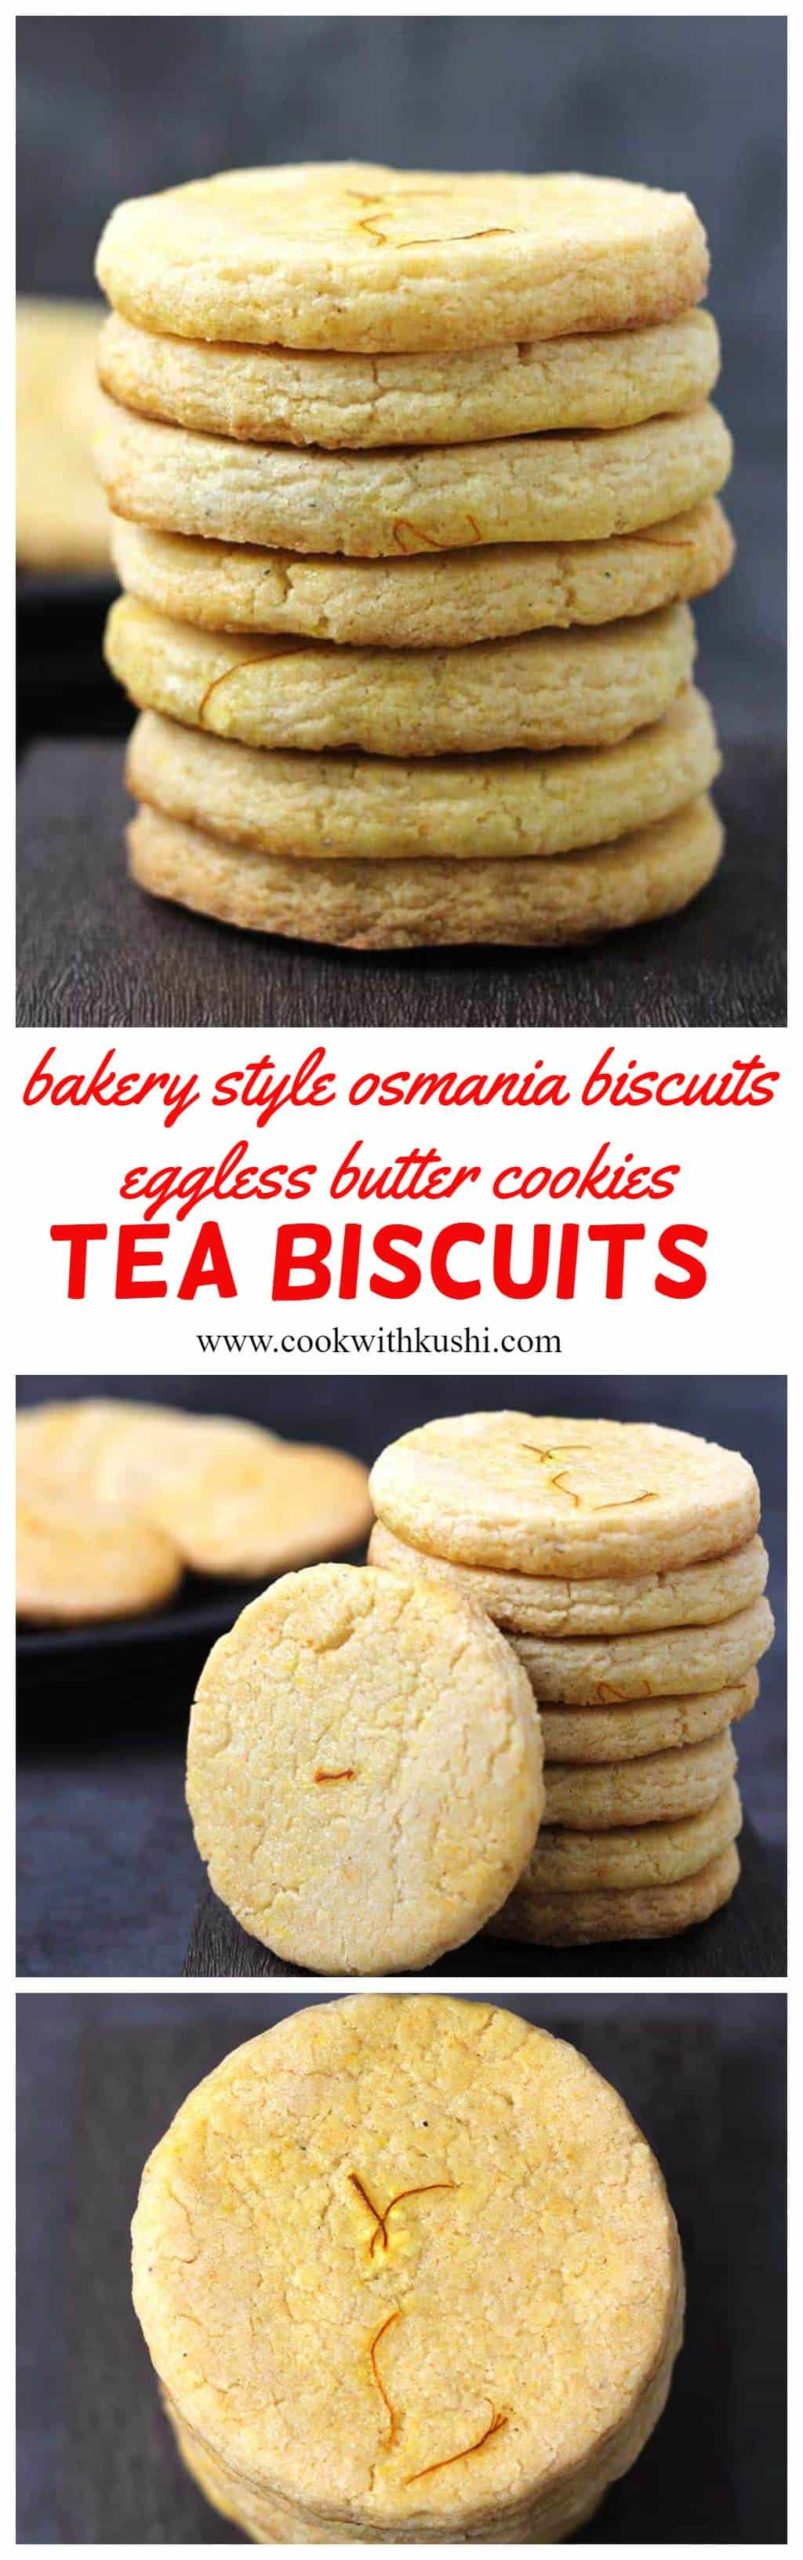 Tea Biscuits | How to make bakery style Osmania Biscuits or Moon Biscuits or Cardamom Cookies or saffron Flavored Biscuits, eggless cookies, holiday cookies, holiday baking